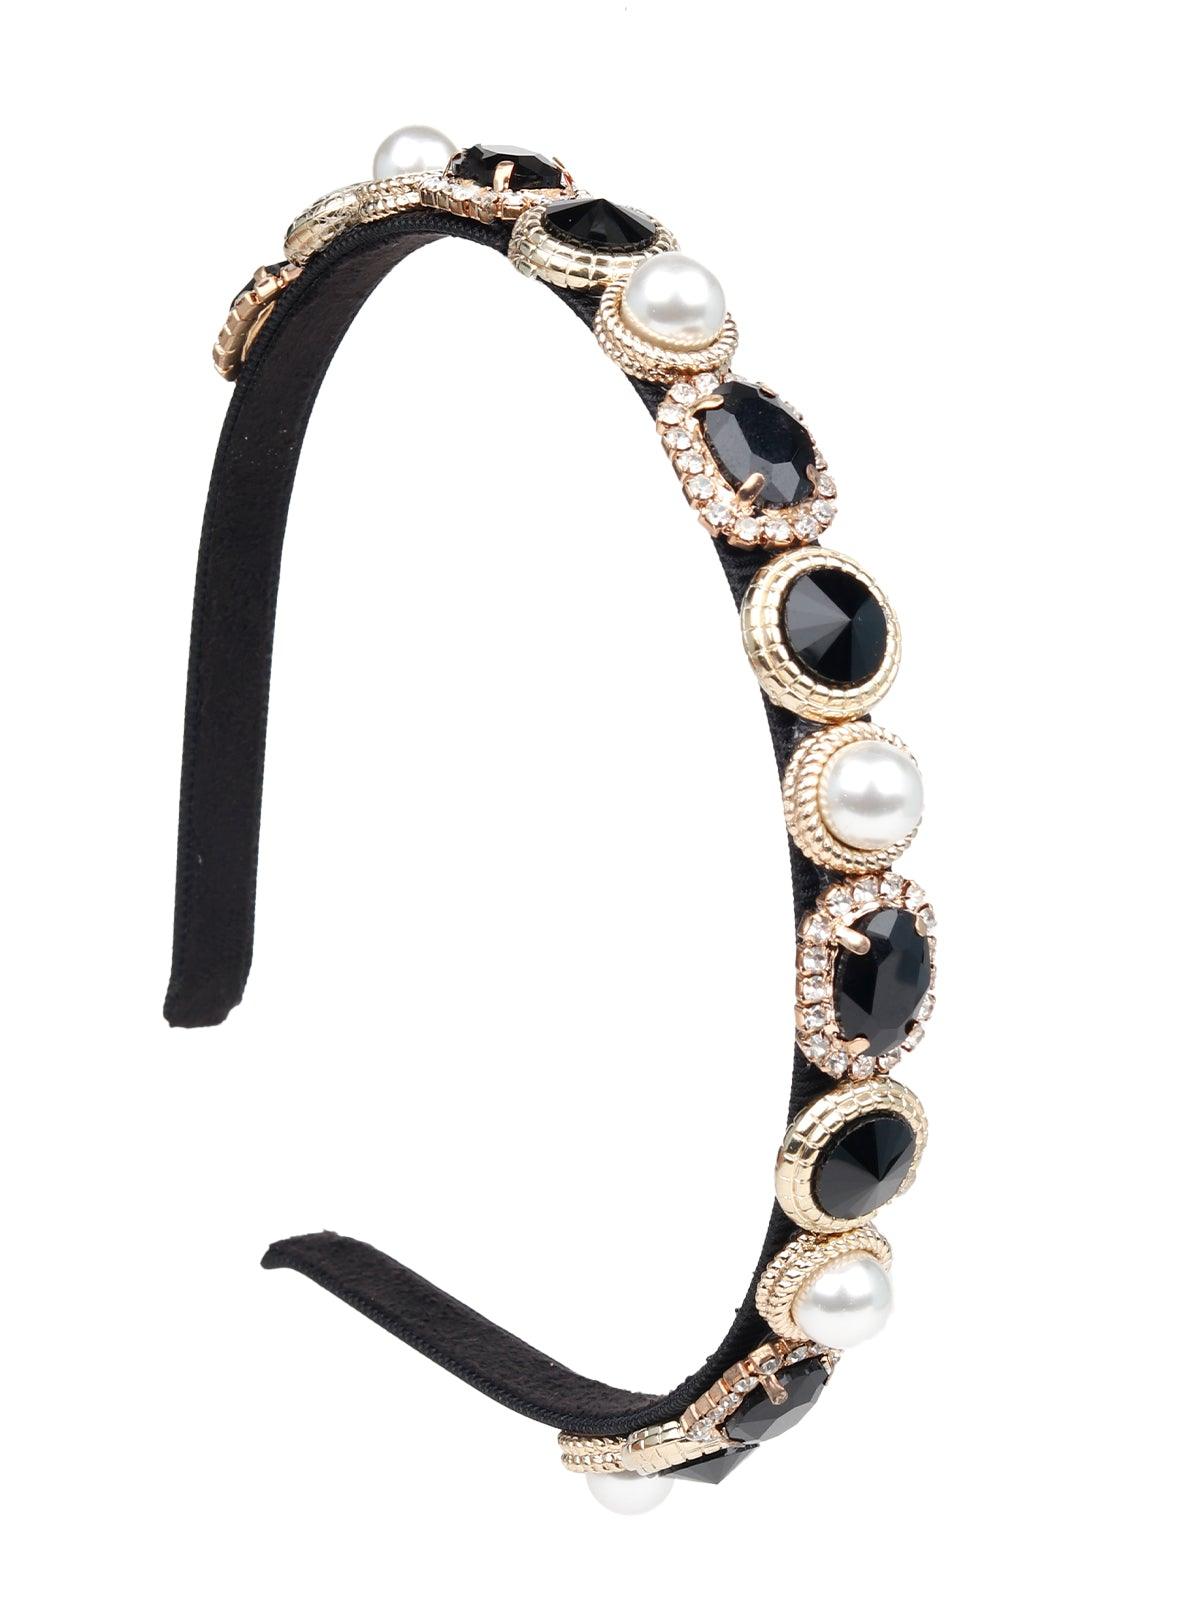 Exquisite Black And White Crystal-Studded Hairband - Odette